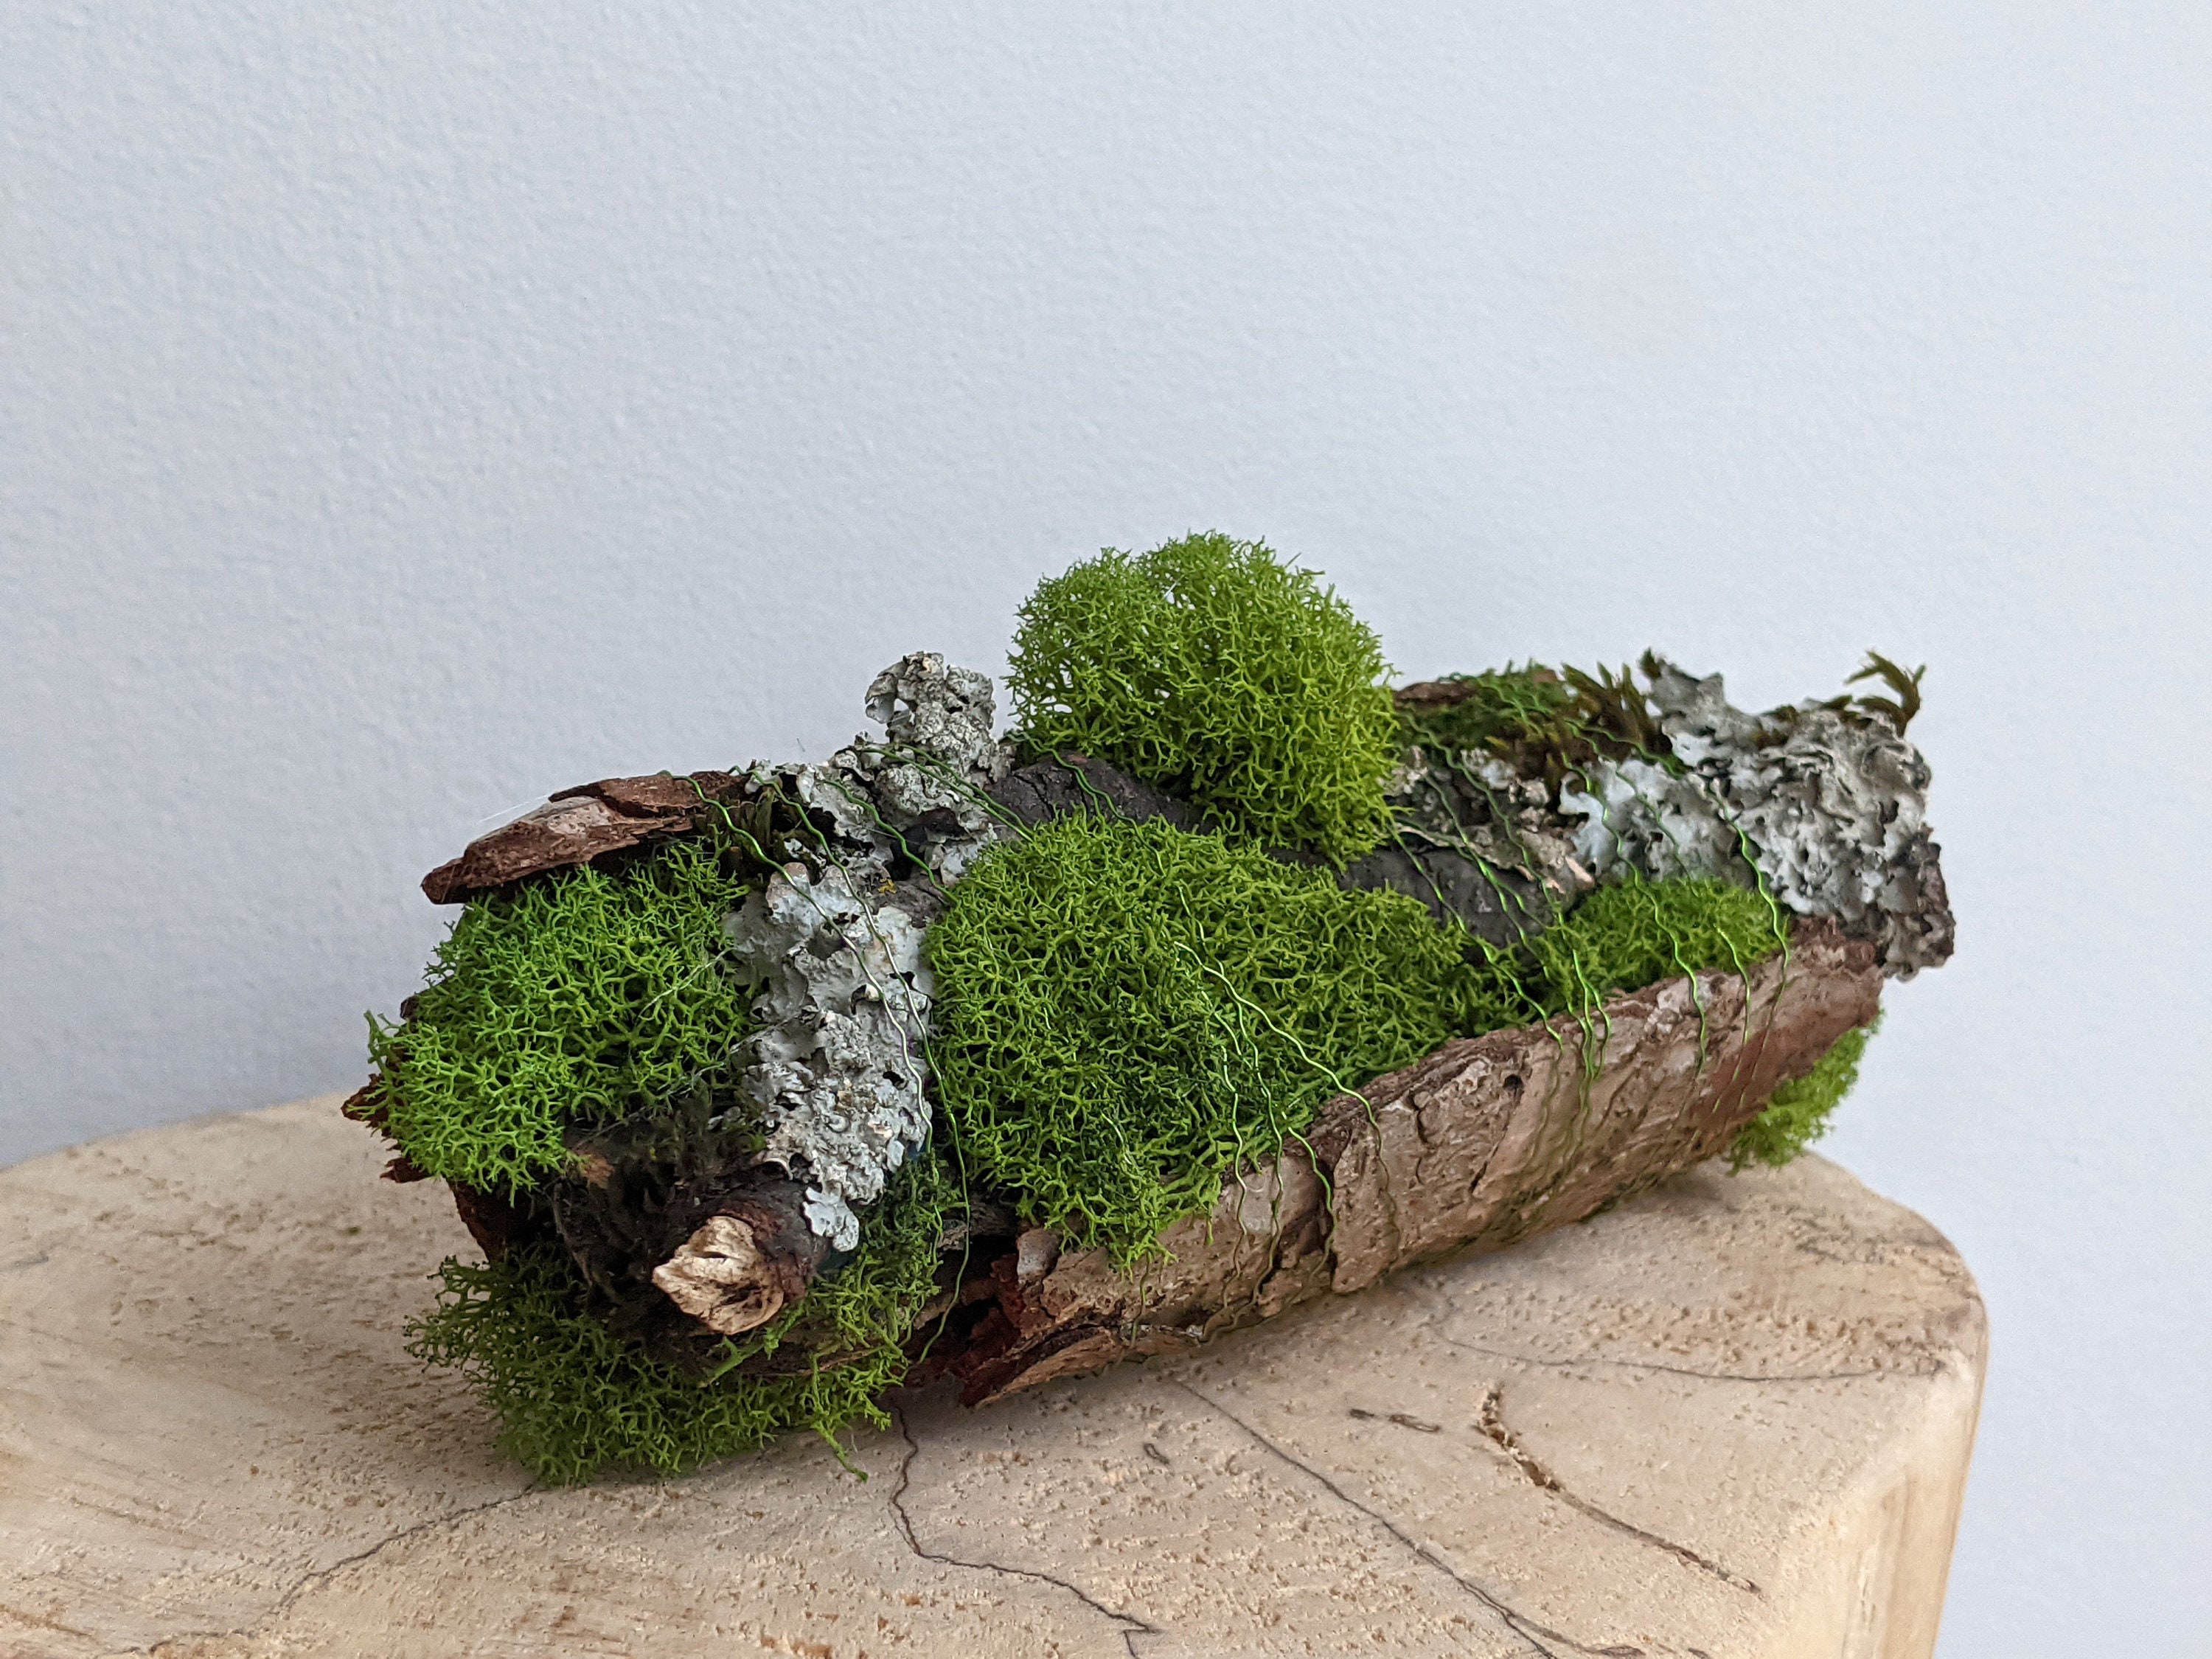 Canada Wide Delivery Available for a Charge, Delivery in GTA. Moss Bowl,  Restoration Hardware Inspired. 